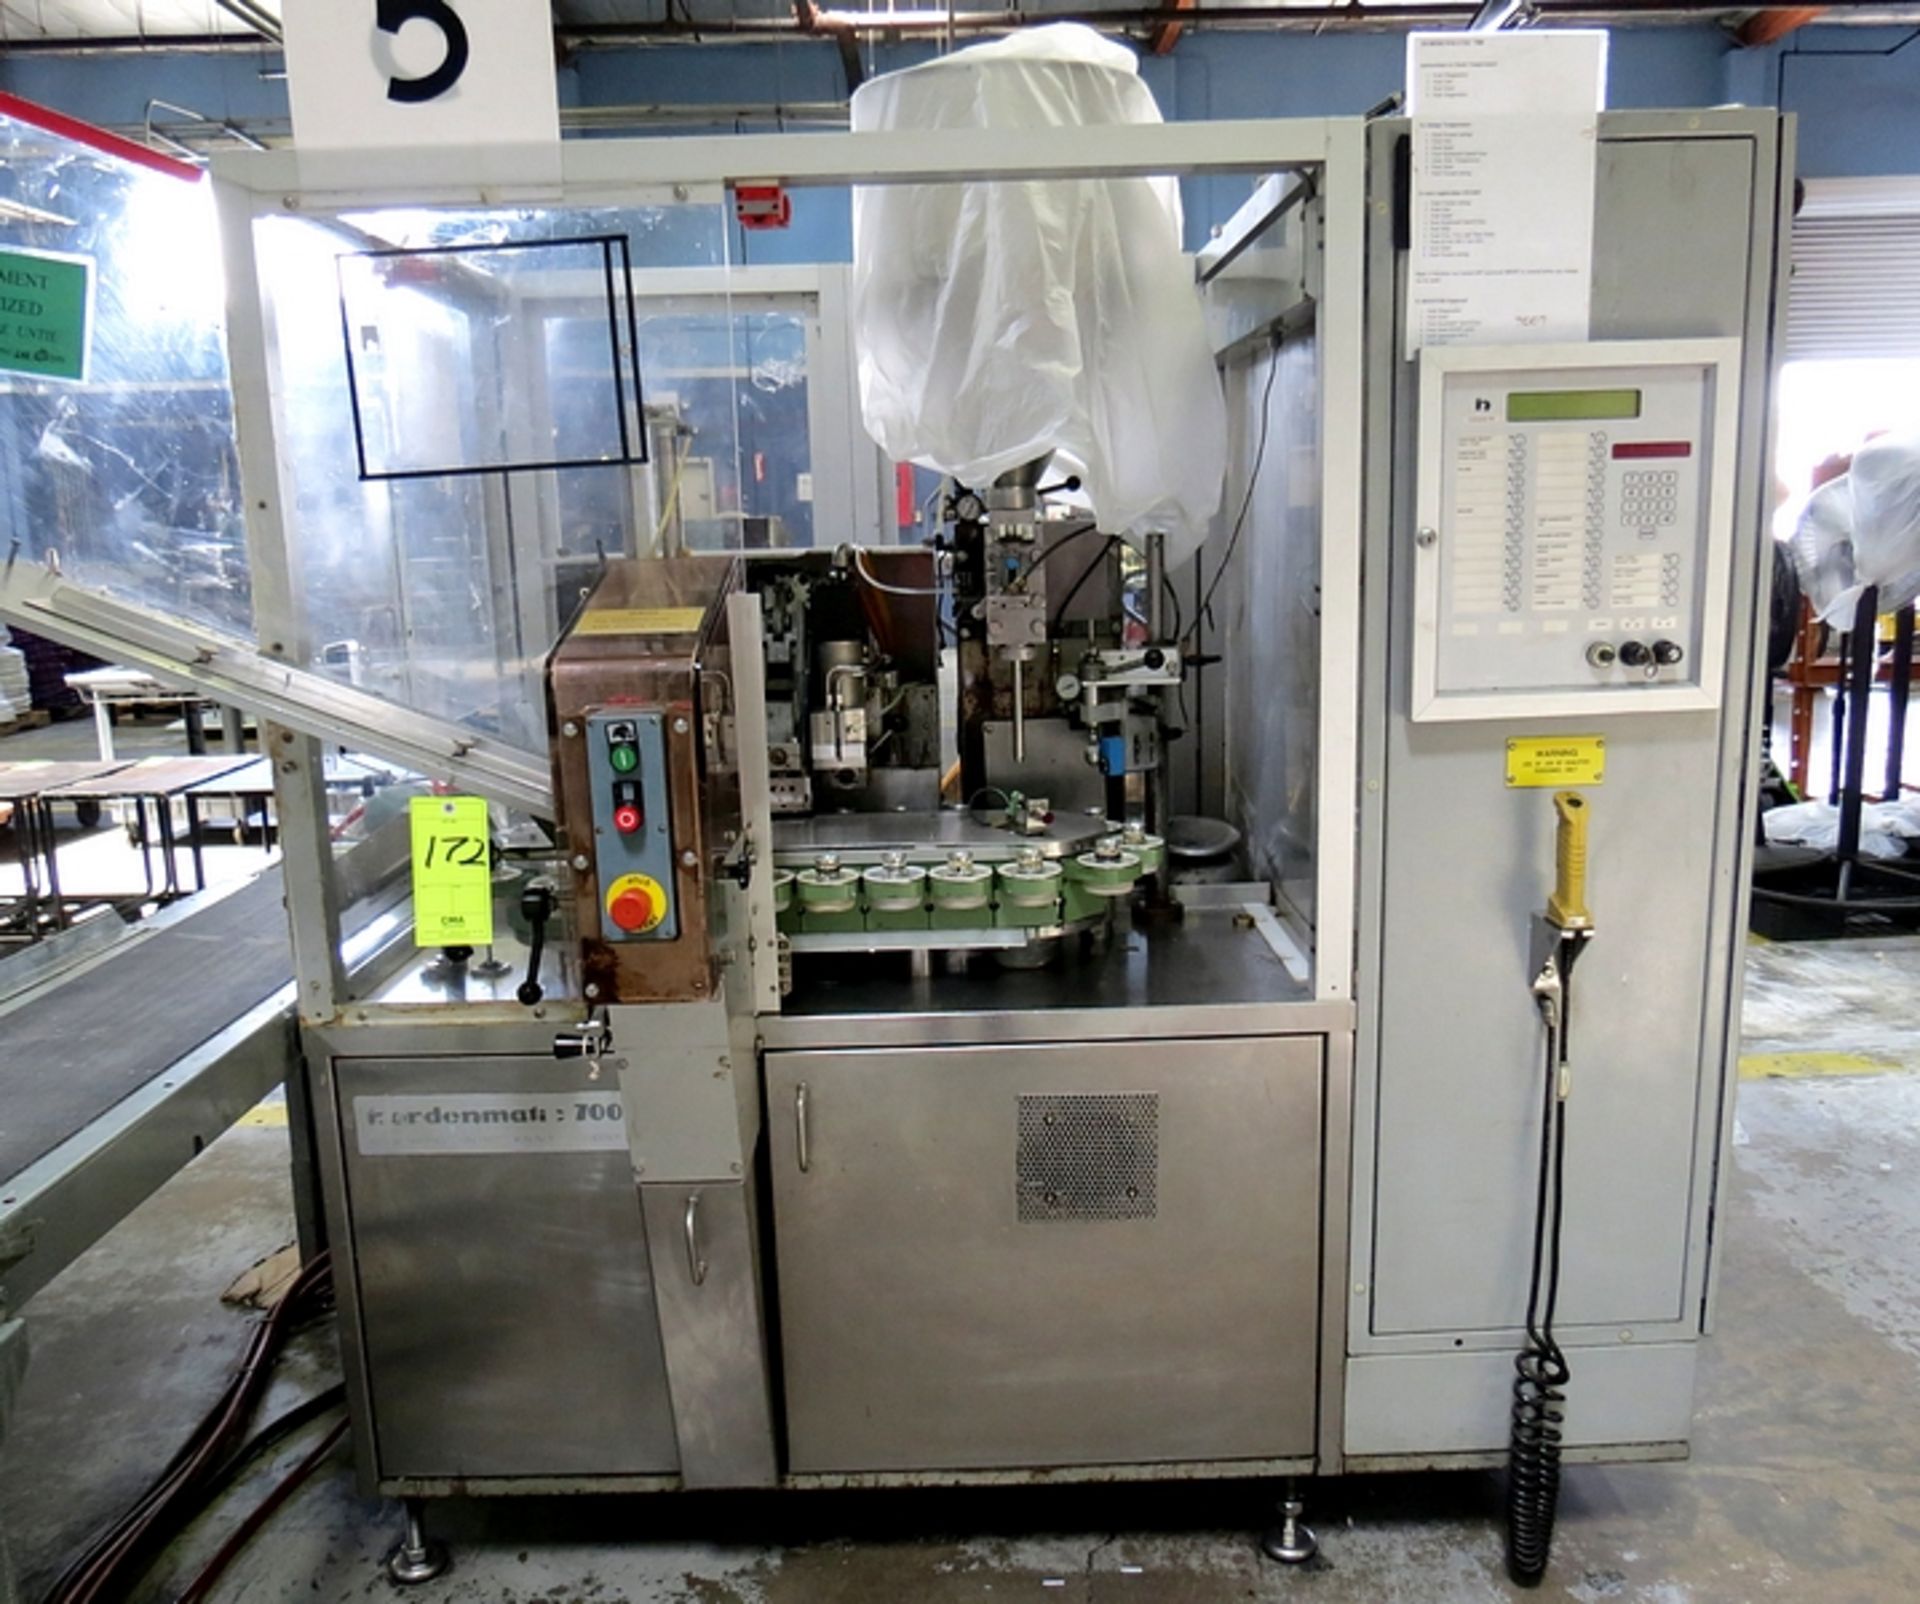 NORDEN 700 SERIES NORDENMATIC HOT AIR TUBE FILLING/SEALING MACHINES WITH TOUCH PAD CONTROLS, 220V,